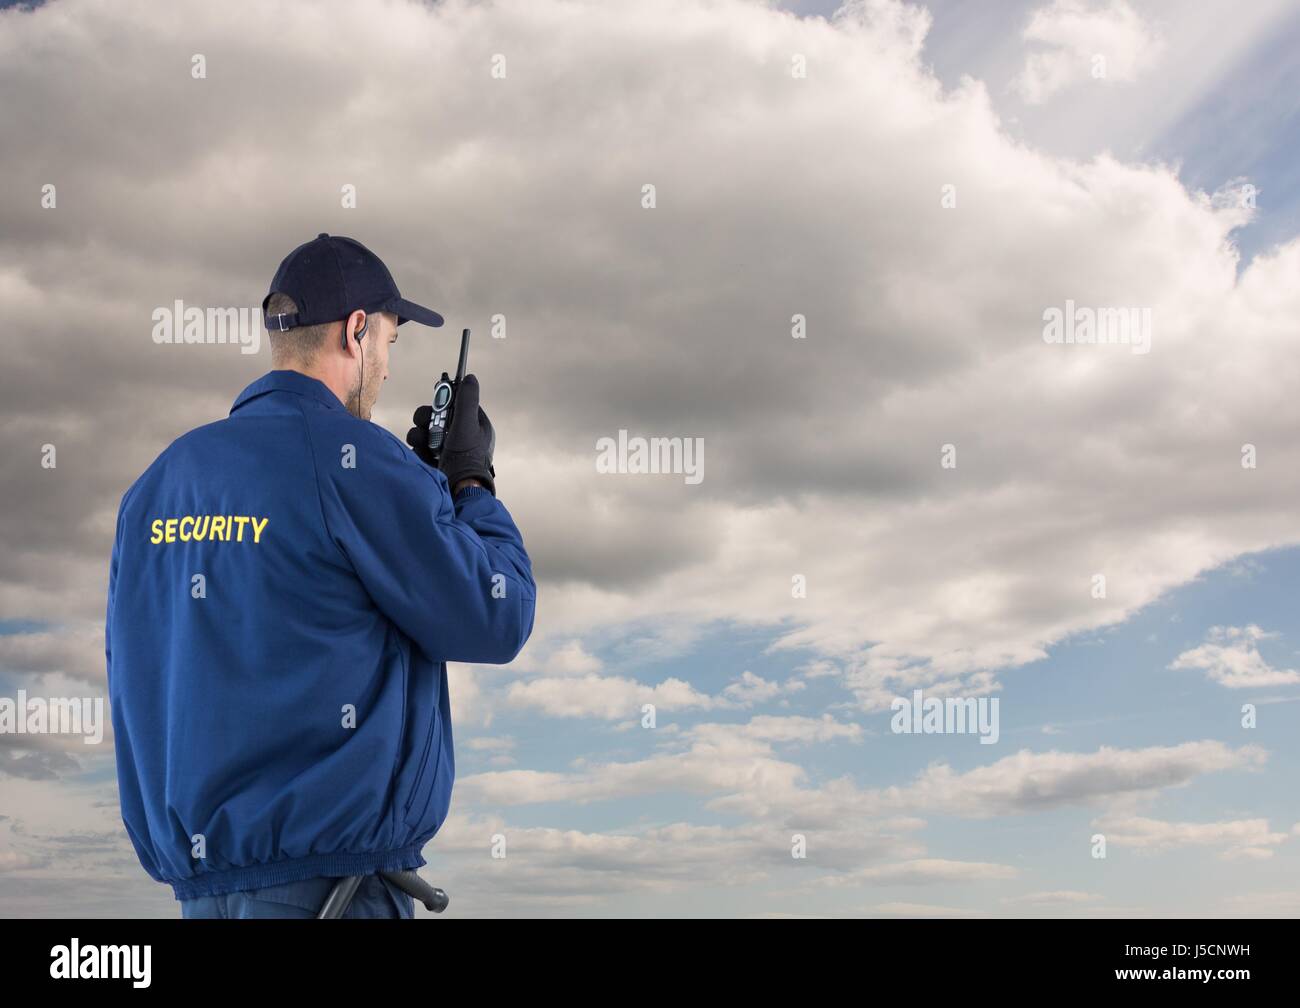 Digital composite of Rear view of security guard using radio against cloudy sky Stock Photo